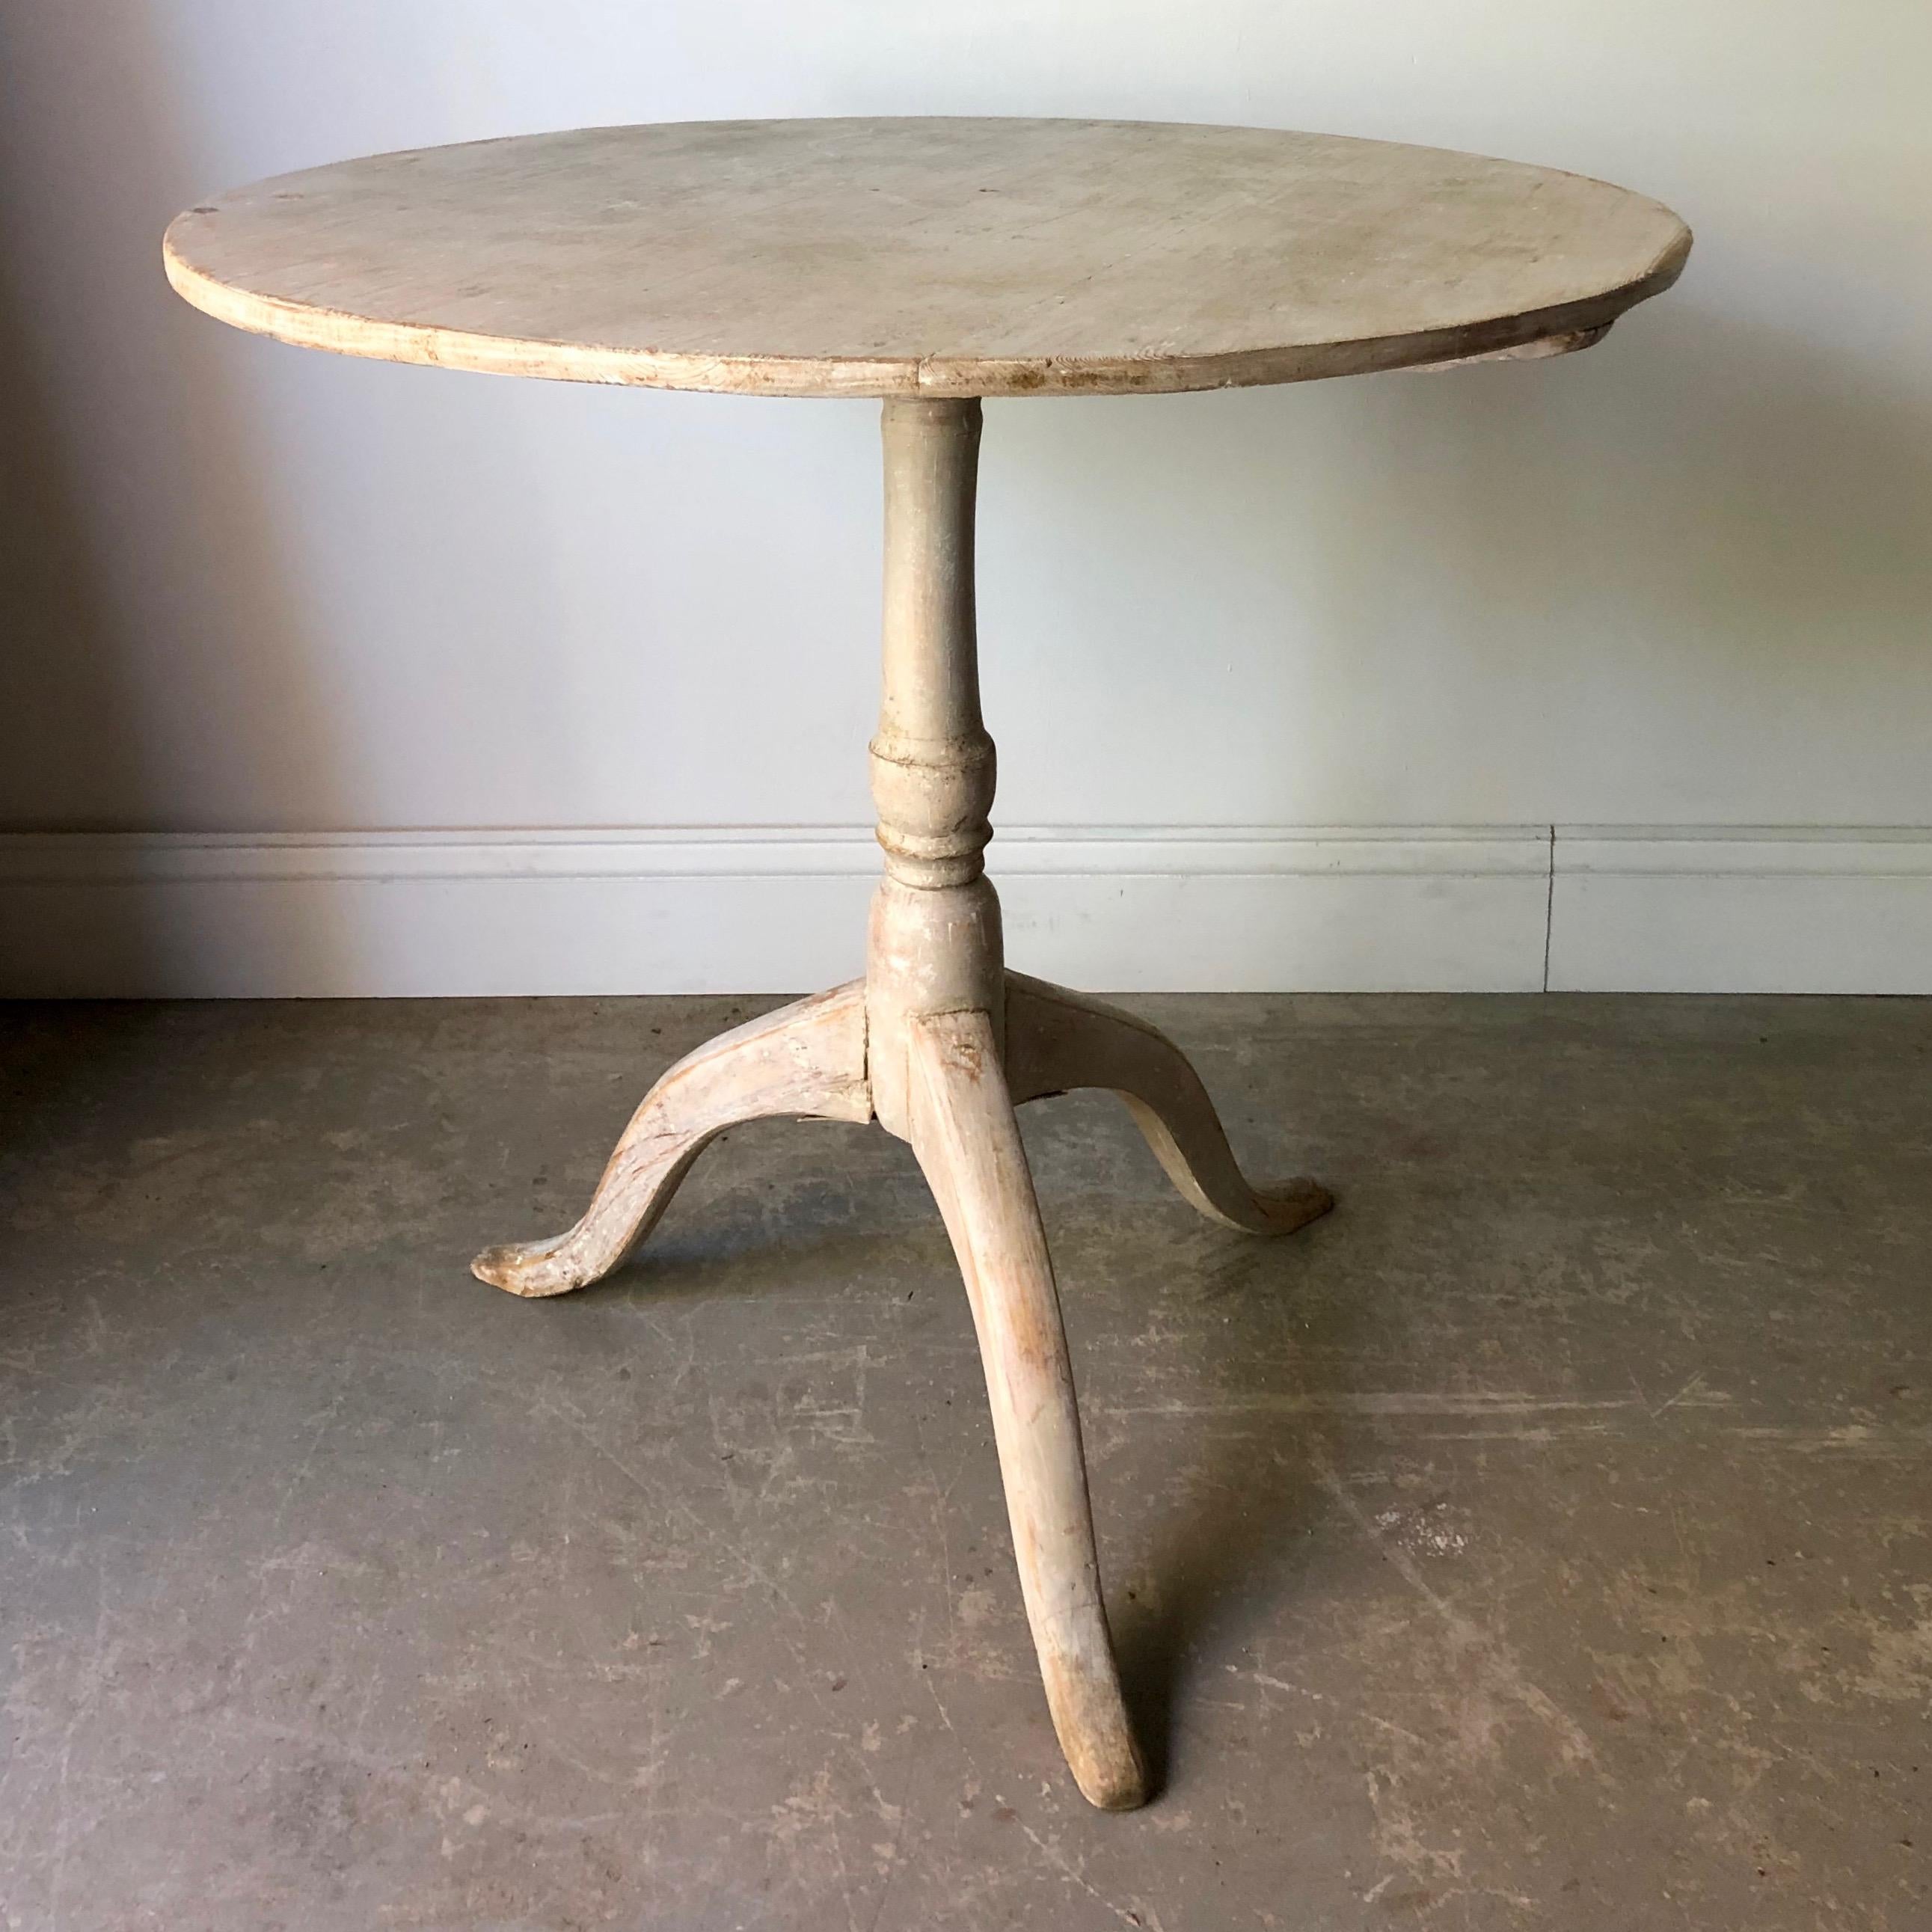 19th century painted round top pedestal table with turned base supported by beautifully carved legs. Scraped pack to traces of its original paint.
Värmland, Sweden, circa 1840.

  